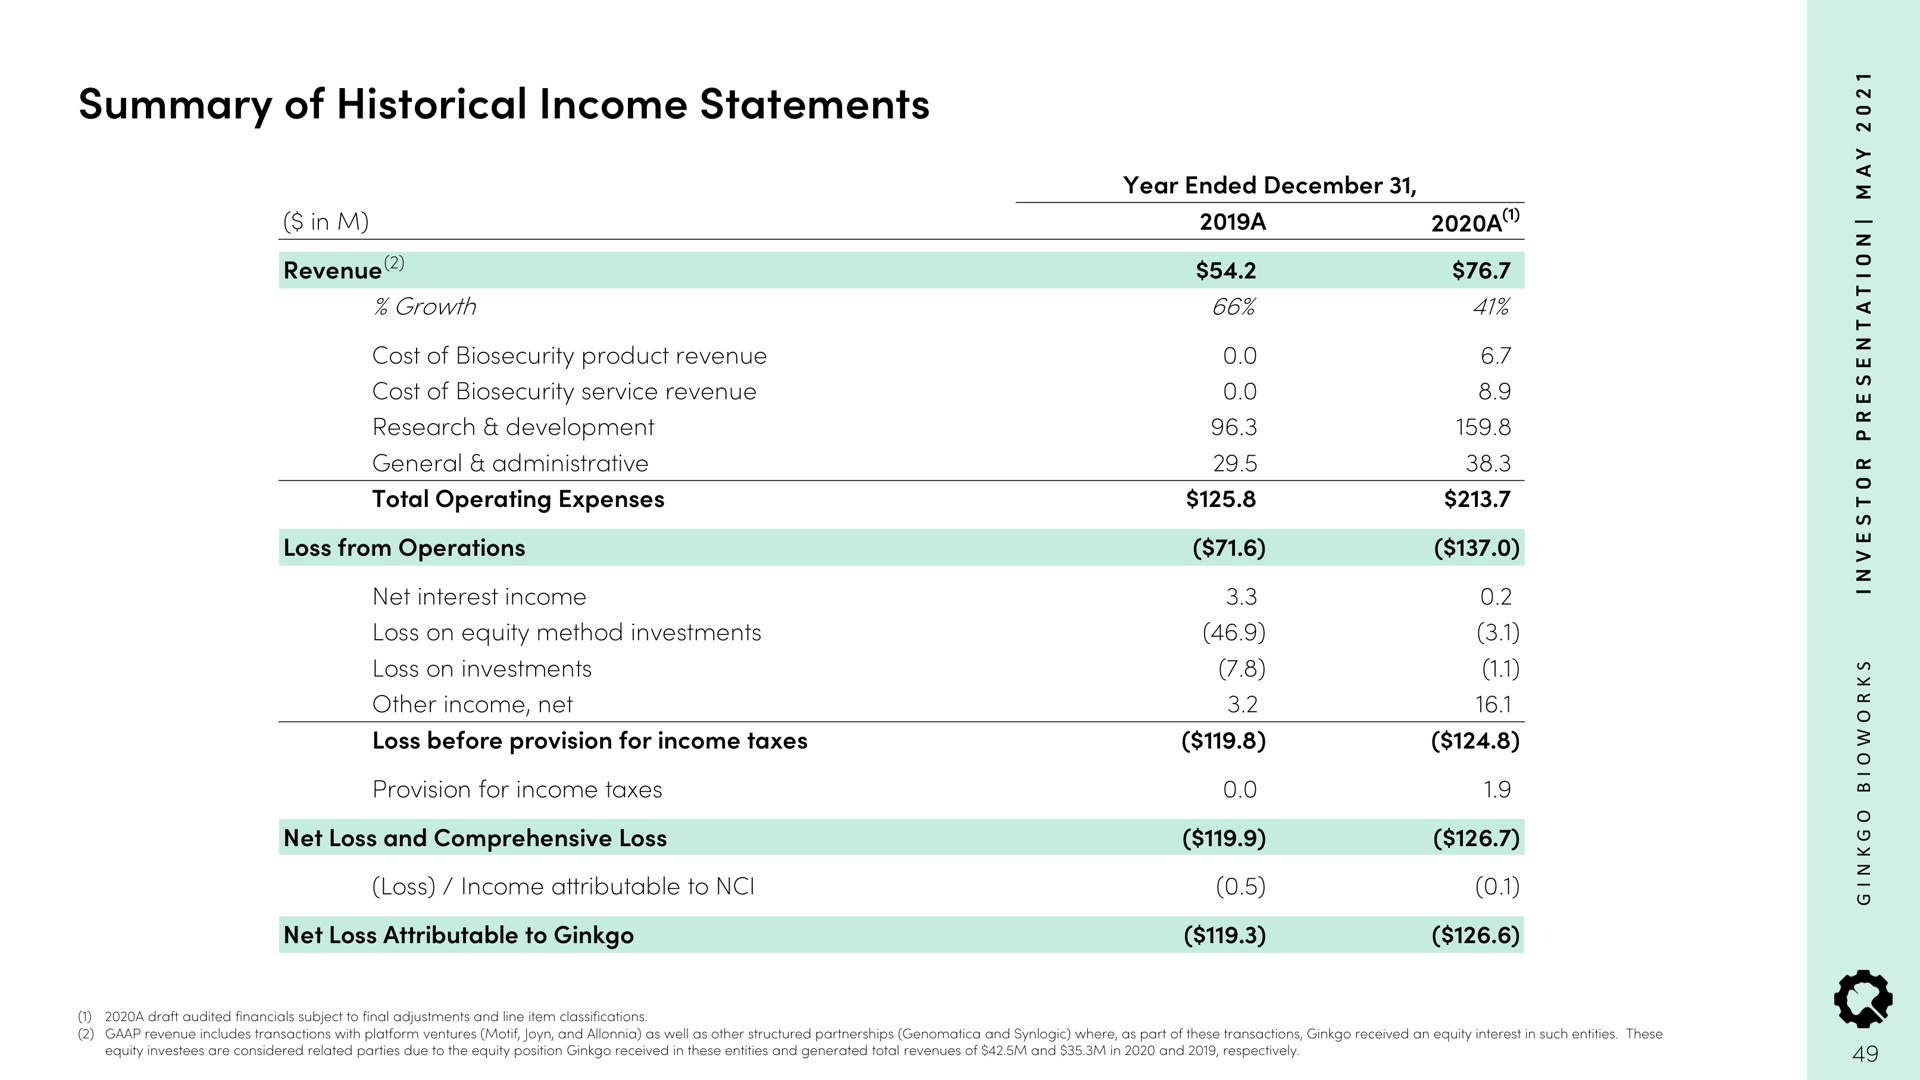 summary of historical income statements | Ginkgo